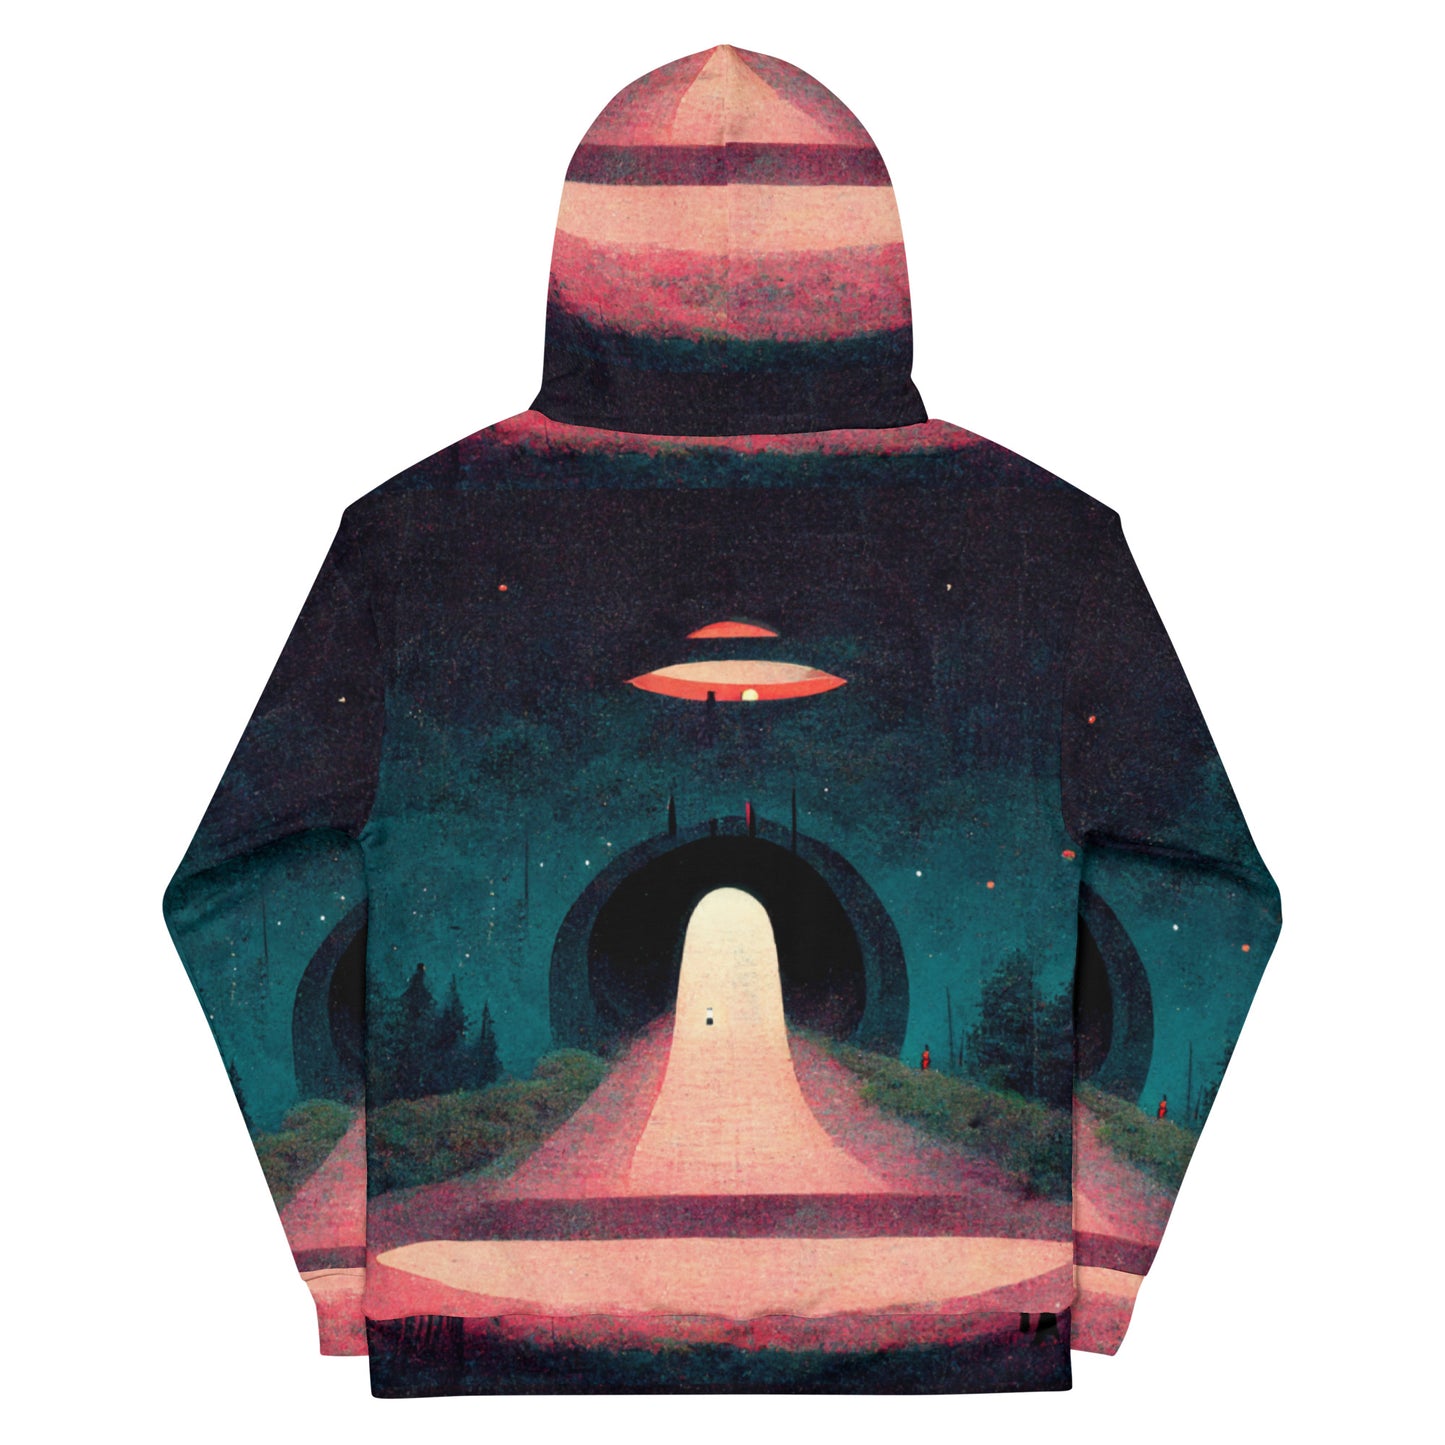 The UFO Rabbit Hole All-Over Print Hoodie